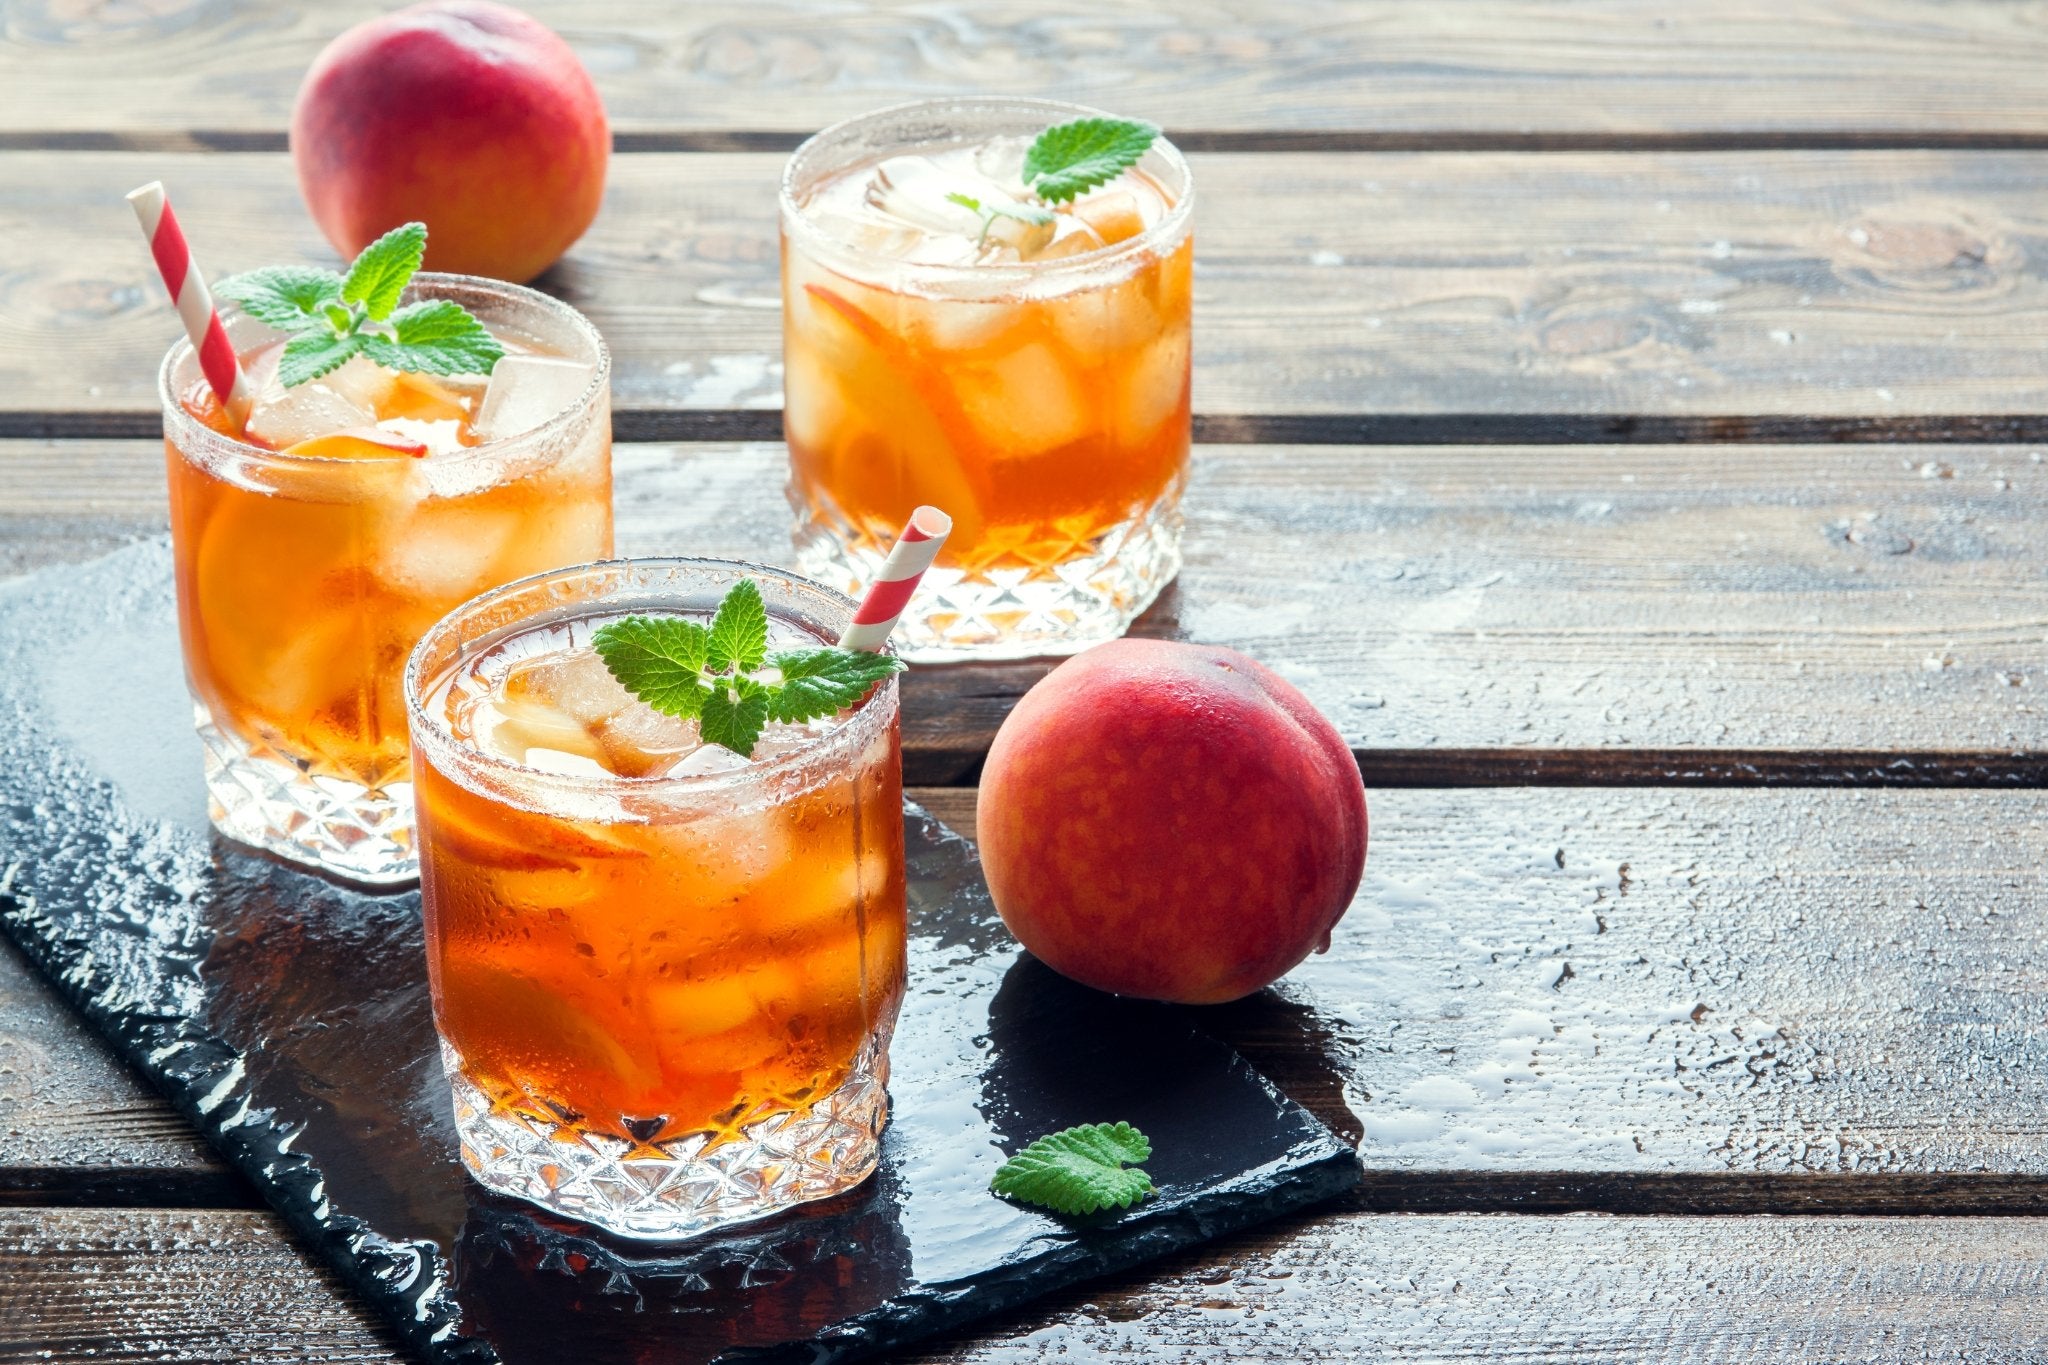 Infuse Balance Into Your Summer With This Delicious Peach Arnold Palmer Recipe - Loose Leaf Tea Market